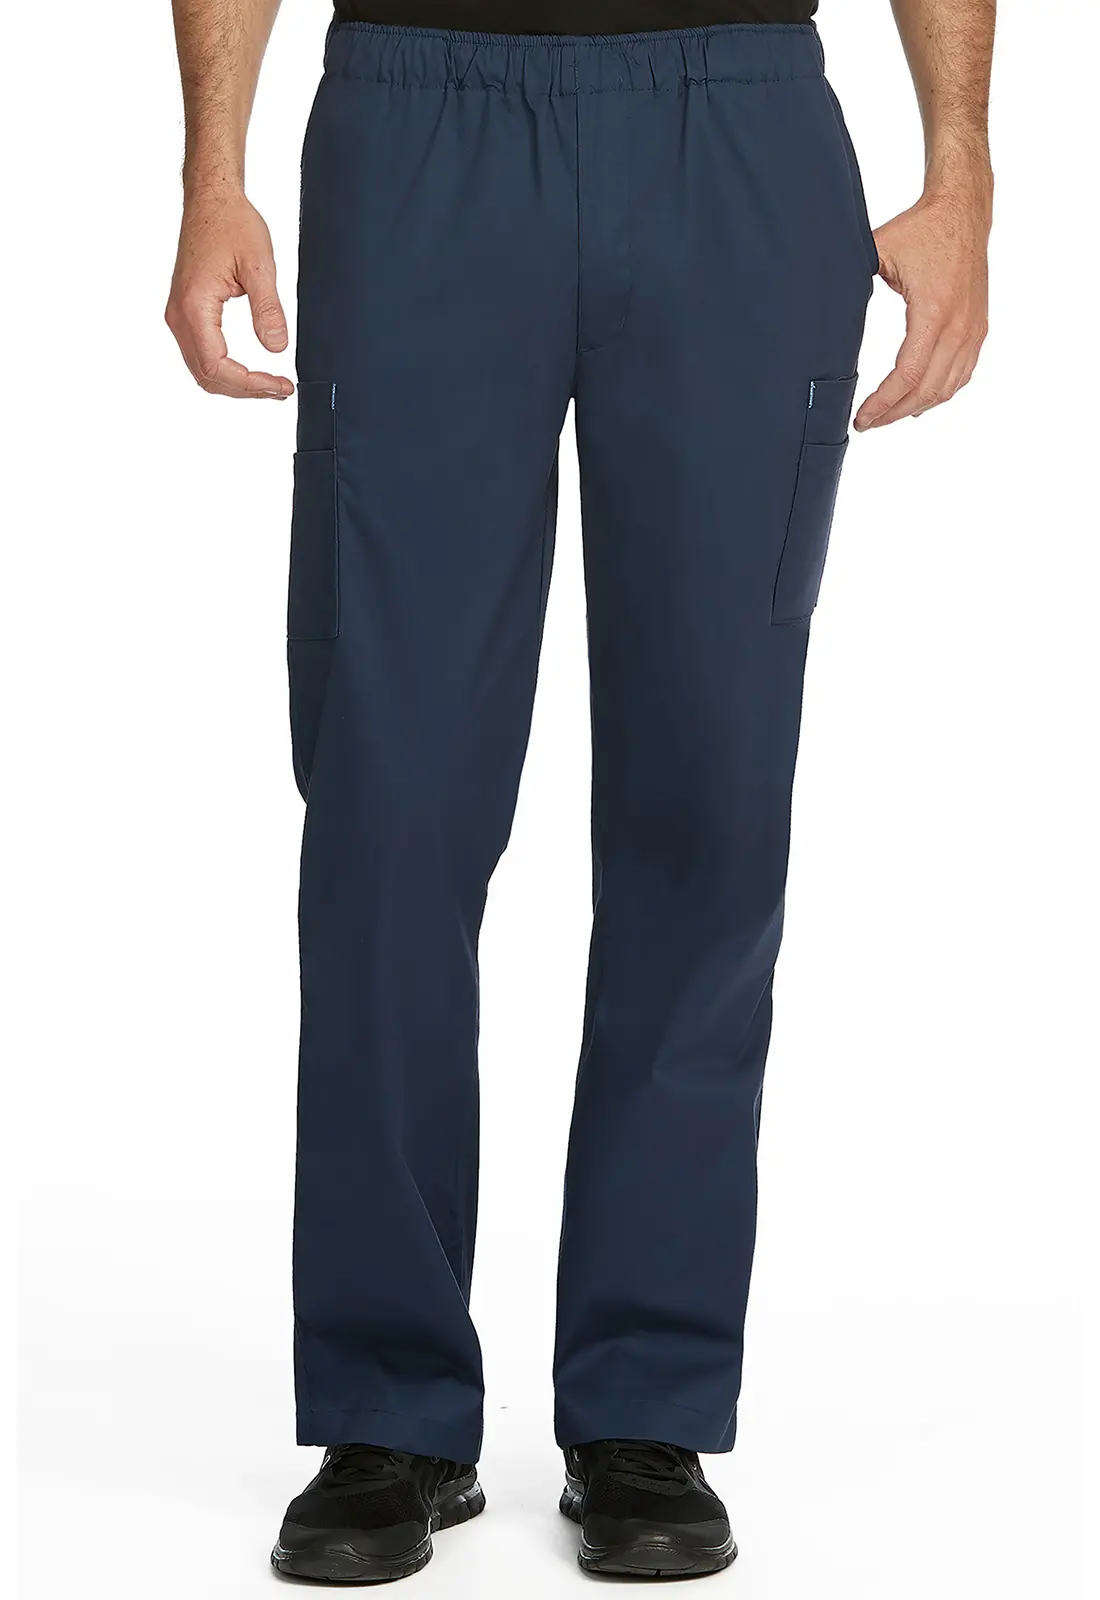 Mens 2 Cargo Pocket Pant-Med Couture